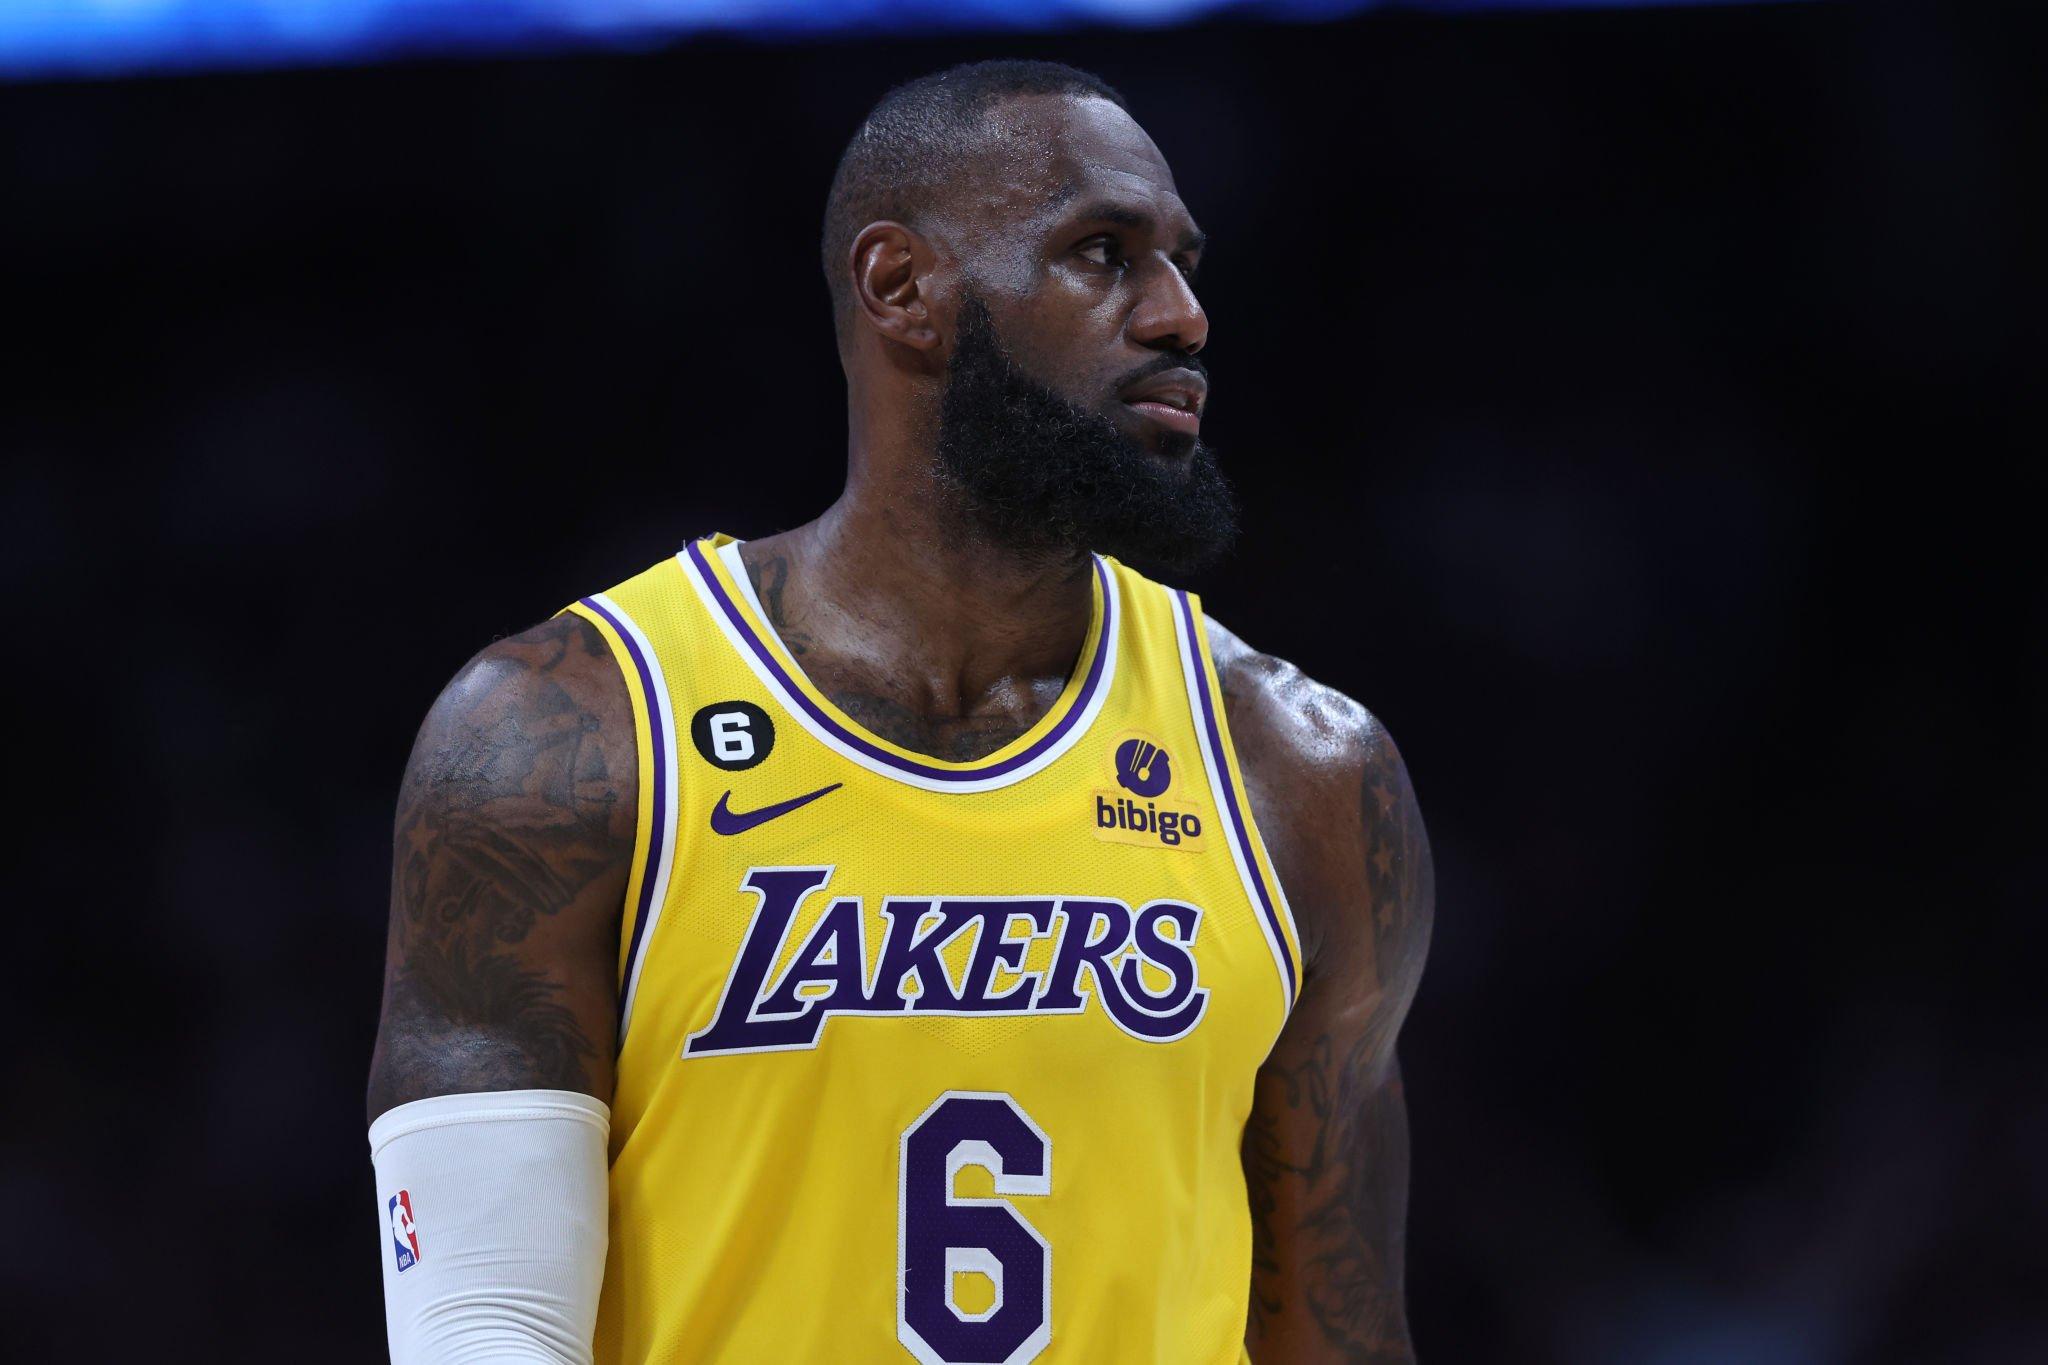 DENVER, COLORADO - MAY 16: LeBron James #6 of the Los Angeles Lakers reacts during the fourth quarter against the Denver Nuggets in game one of the Western Conference Finals at Ball Arena on May 16, 2023 in Denver, Colorado. NOTE TO USER: User expressly acknowledges and agrees that, by downloading and or using this photograph, User is consenting to the terms and conditions of the Getty Images License Agreement. (Photo by Matthew Stockman/Getty Images)